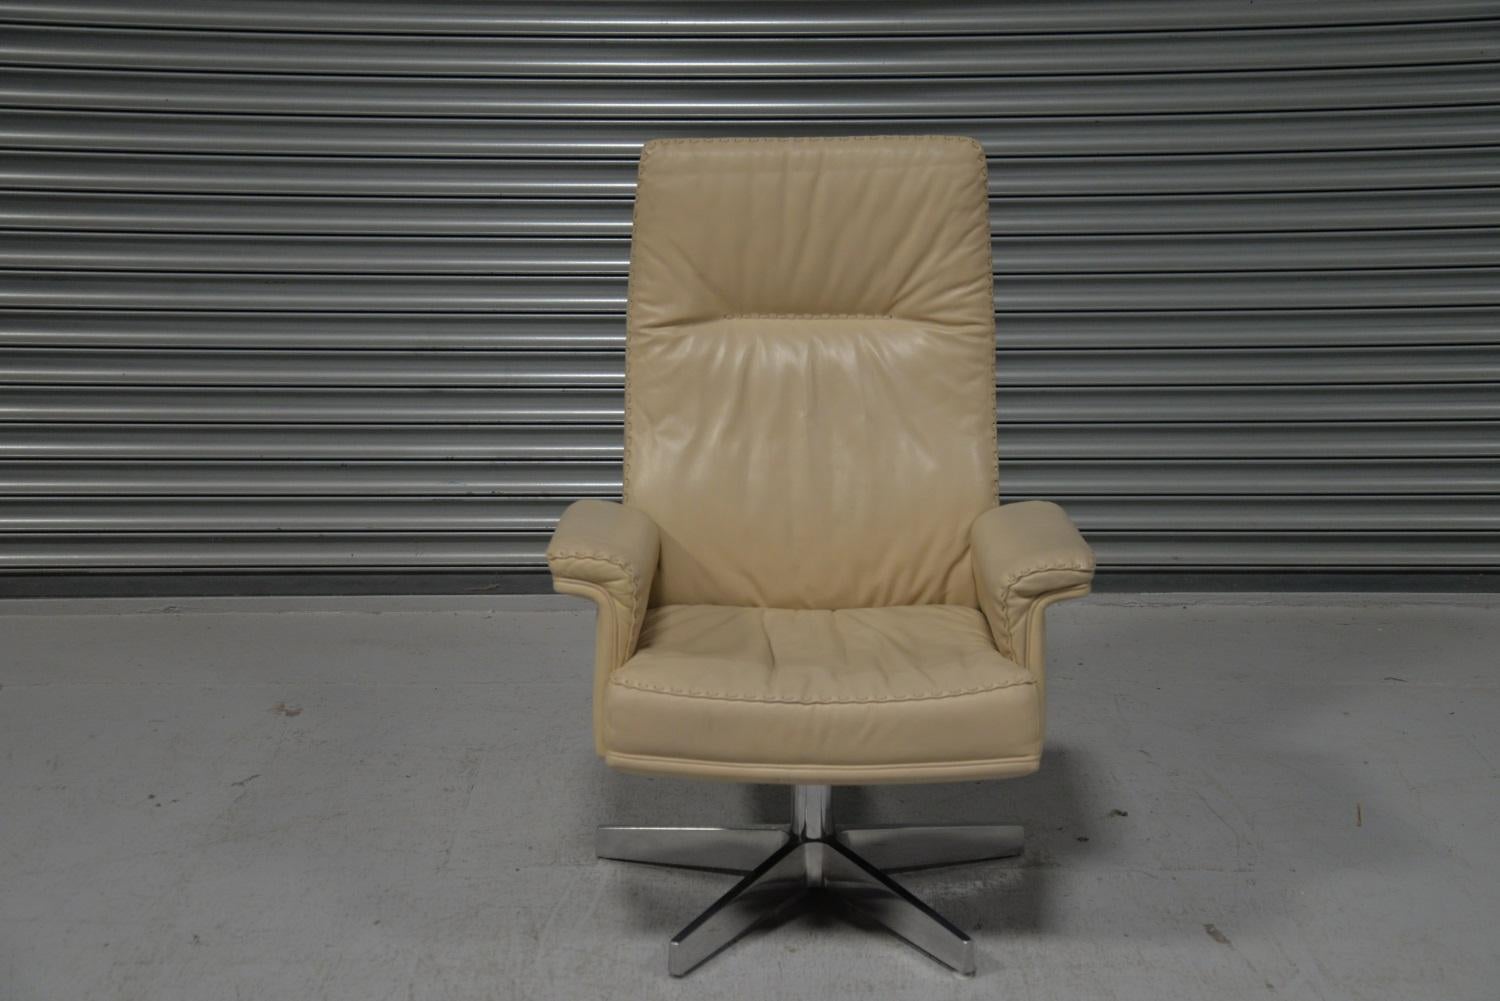 We are delighted to bring to you a vintage 1970s De Sede DS 35 high back leather swivel armchair with ottoman. Hand built in the 1970s by De Sede craftsman in Switzerland, the armchair is upholstered in soft cream aniline leather sitting on a